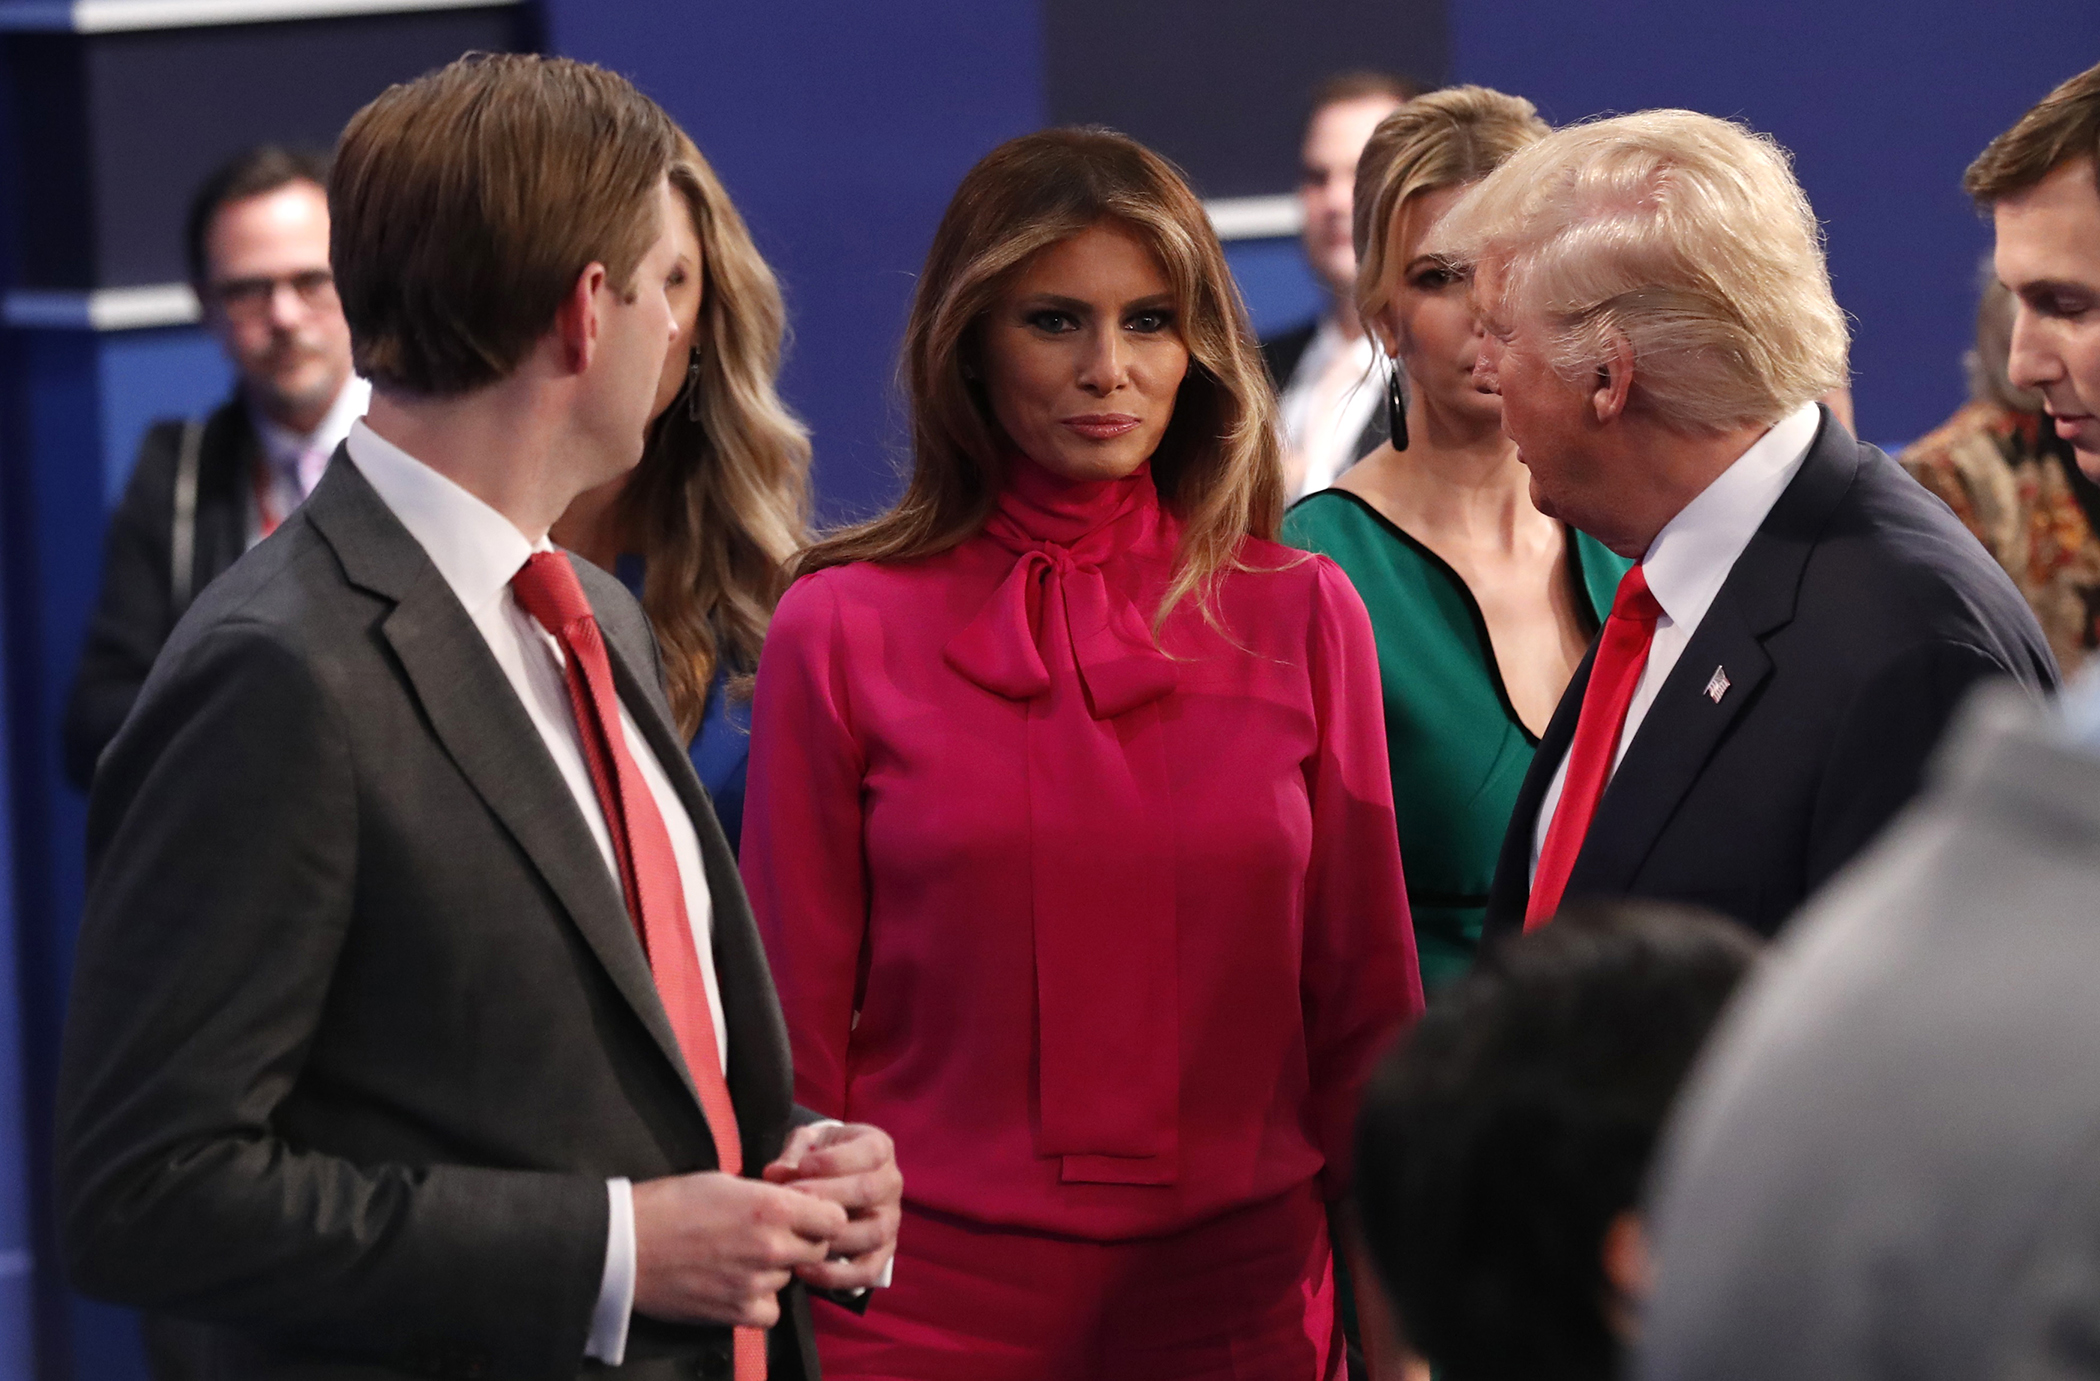 Republican U.S. presidential nominee Donald Trump talks with his son Eric (L), wife Melania (C) and daughter Ivanka (R, rear) at the conclusion of the debate with Democratic U.S. presidential nominee Hillary Clinton at Washington University in St. Louis, October 9, 2016.